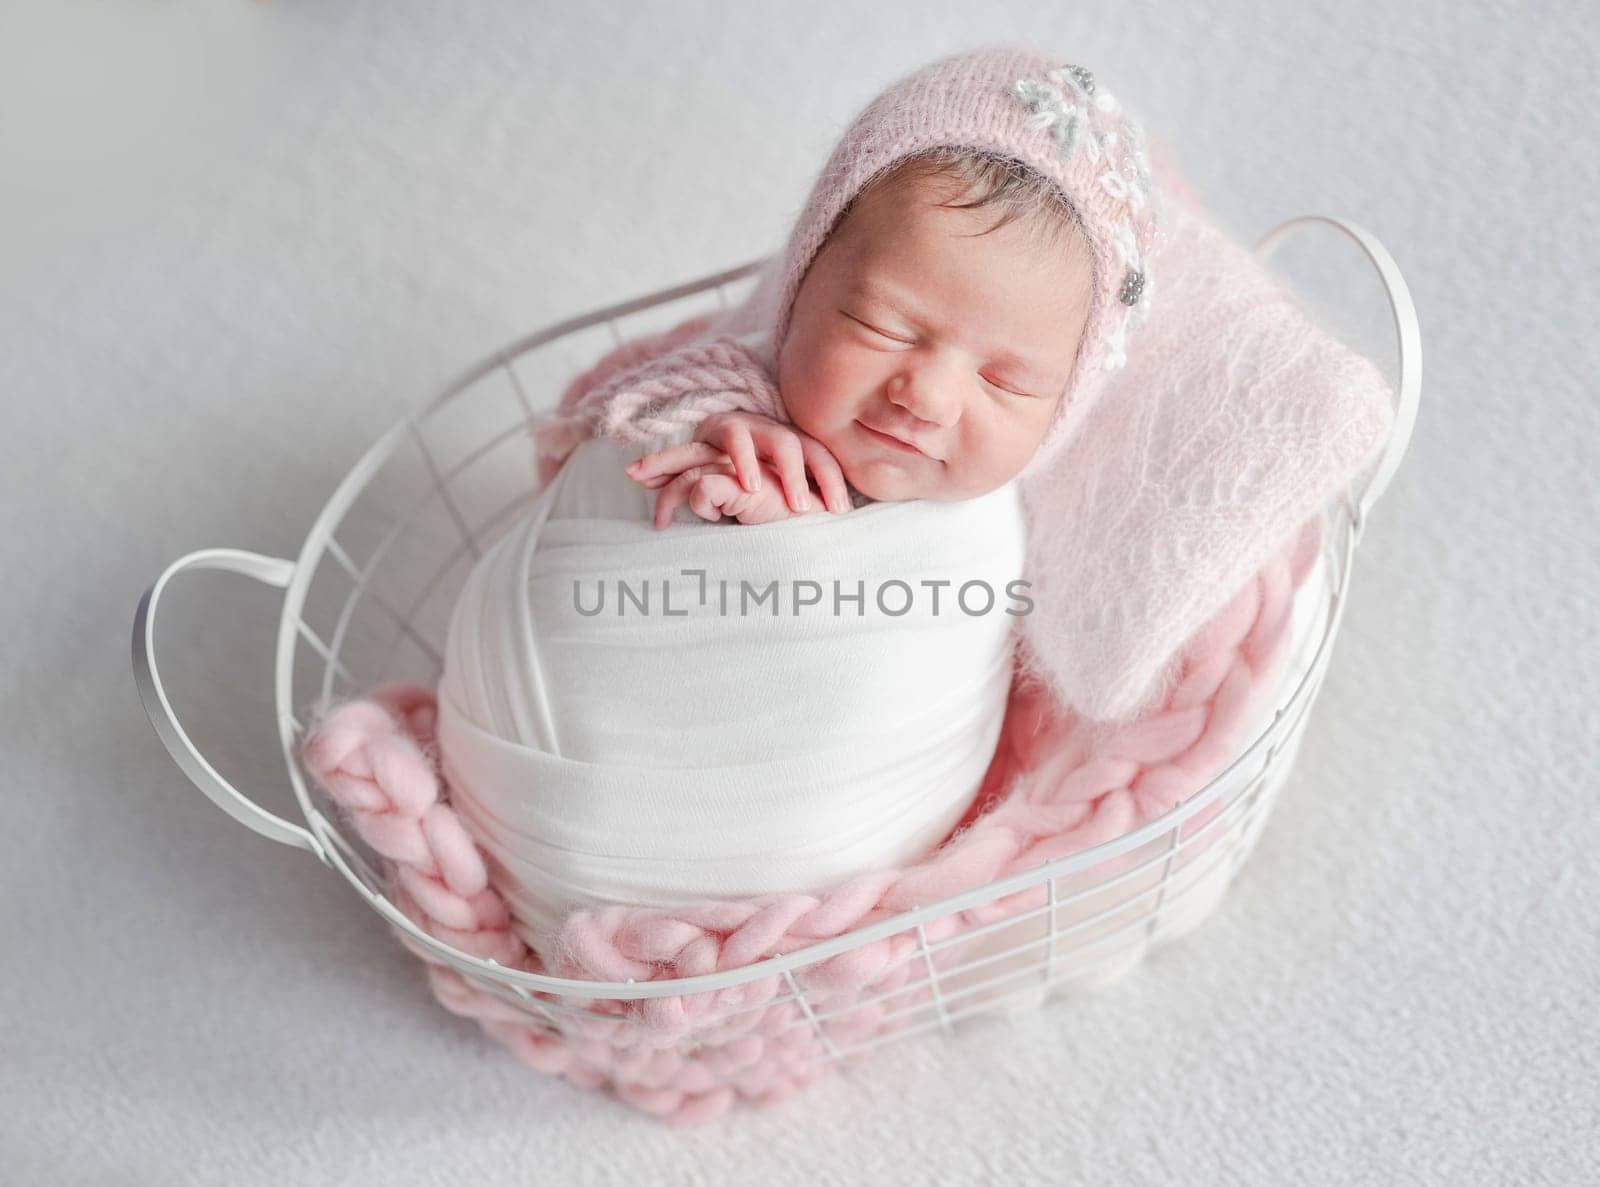 Newborn Girl Sleeps With A Smile In A Basket During A Baby Photo Session In The Studio